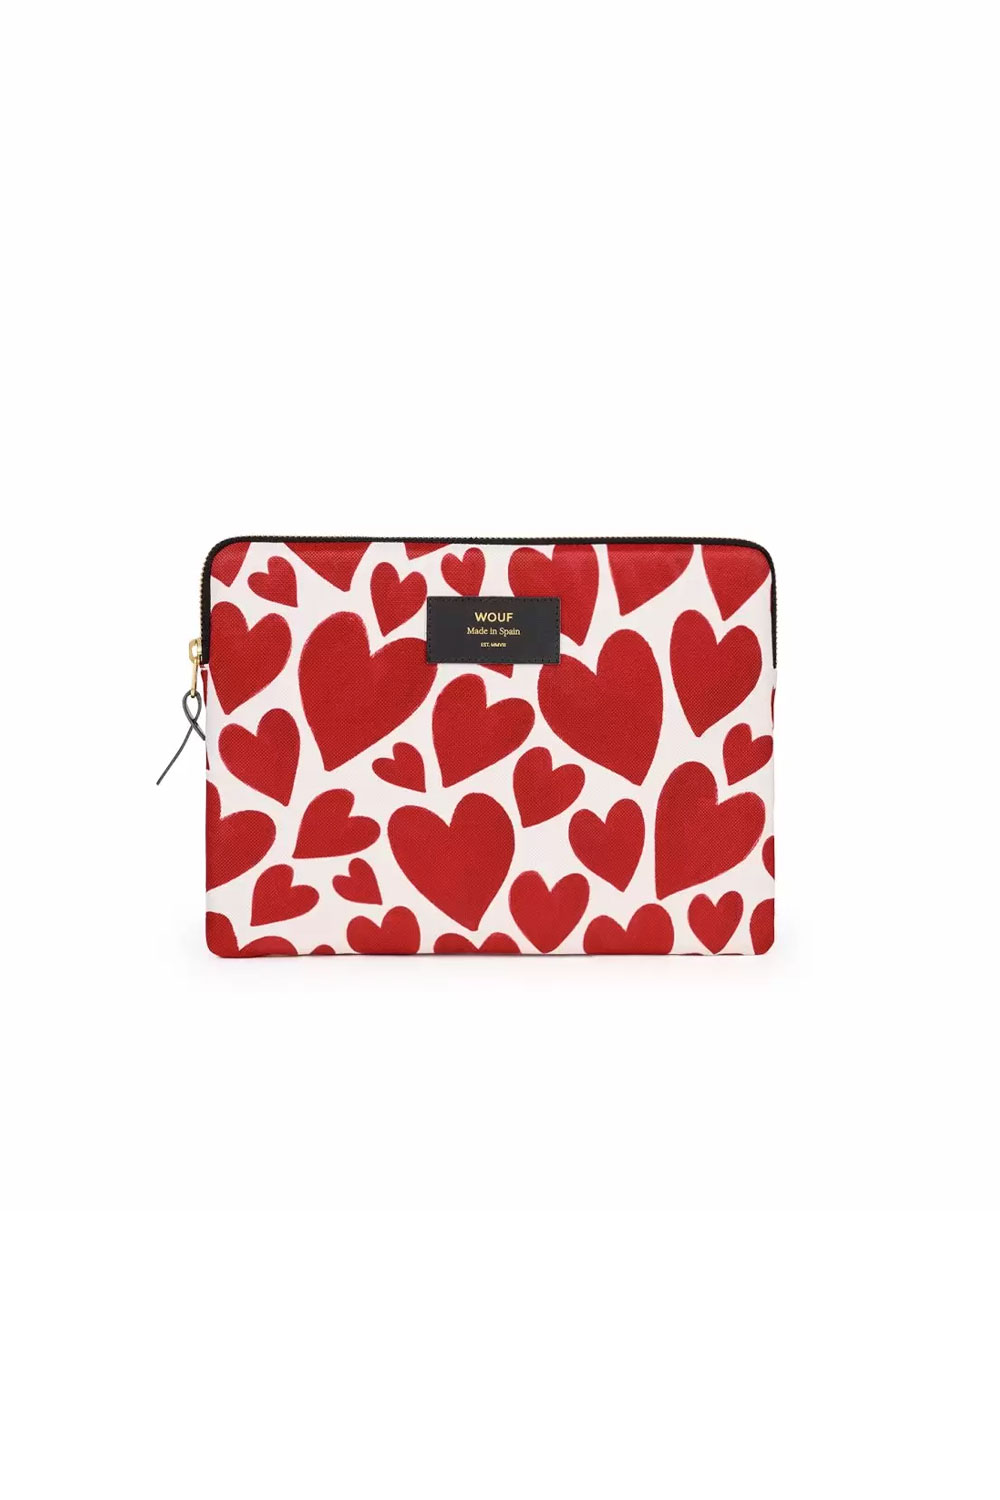 Housse d'iPad 'Amour' 11" | WOUF